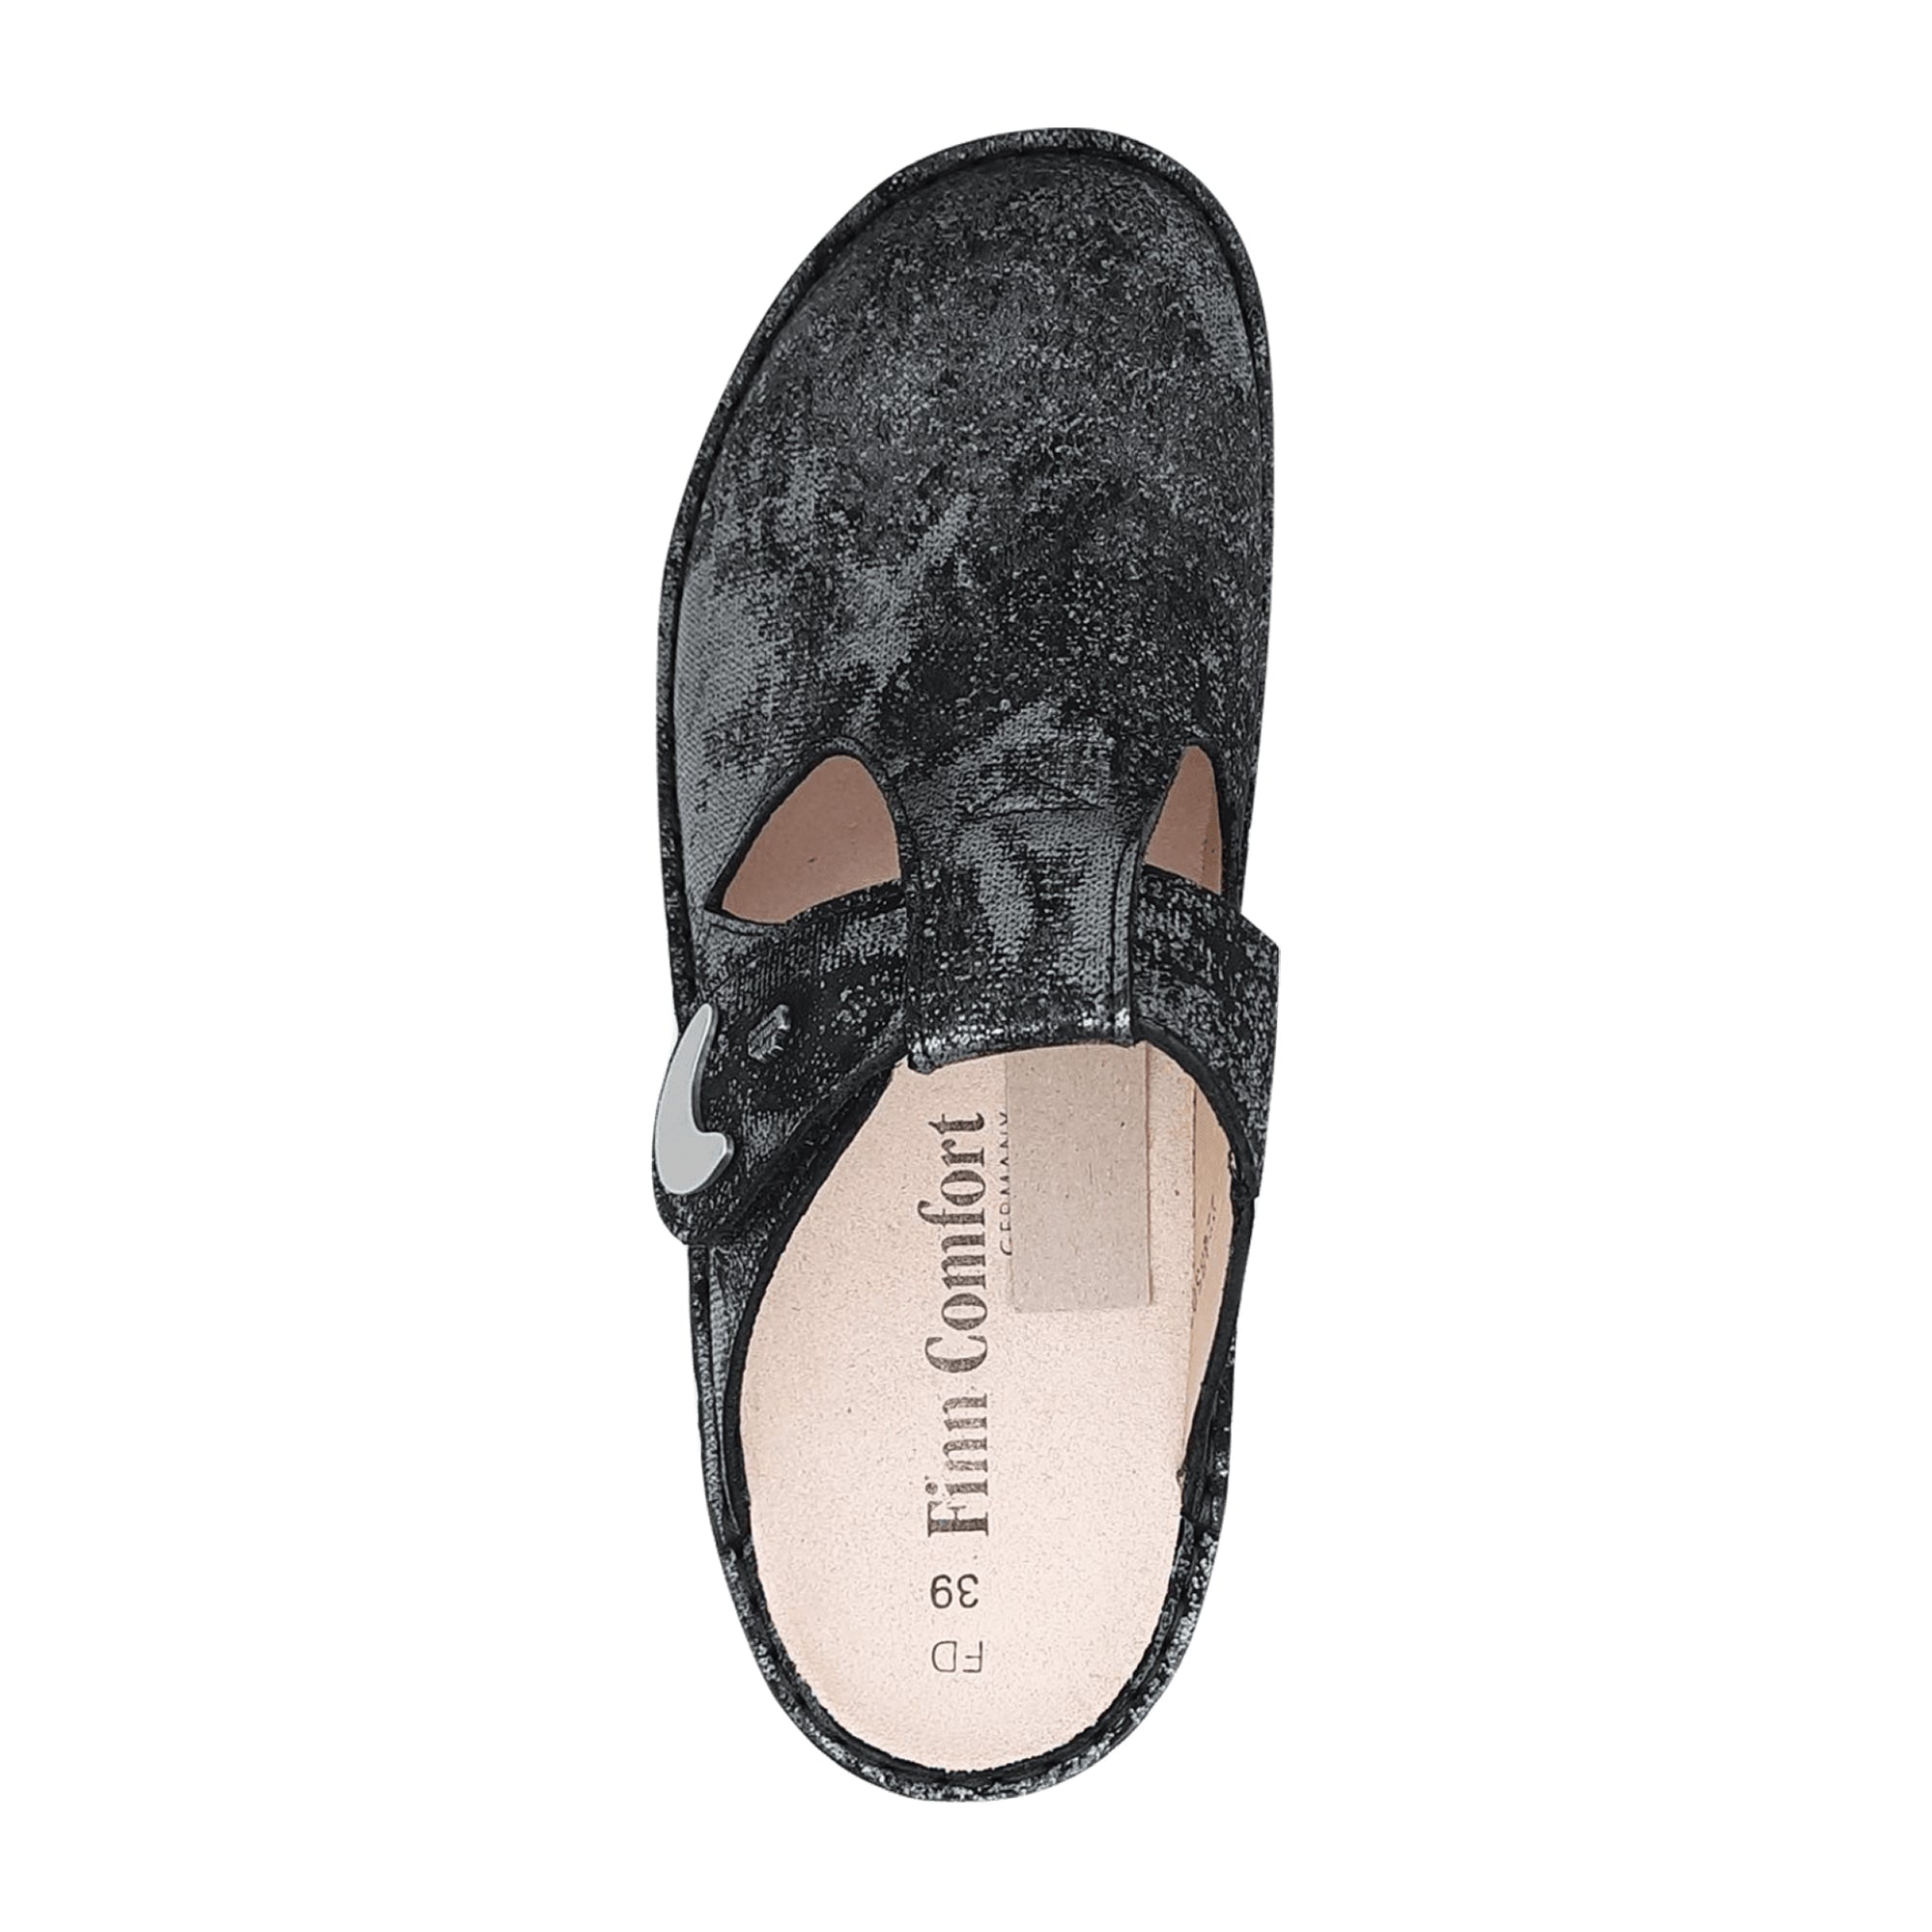 Finn Comfort Belem Neroargento Women's Clogs - Stylish & Comfortable Black Leather Slides with Silver Accents